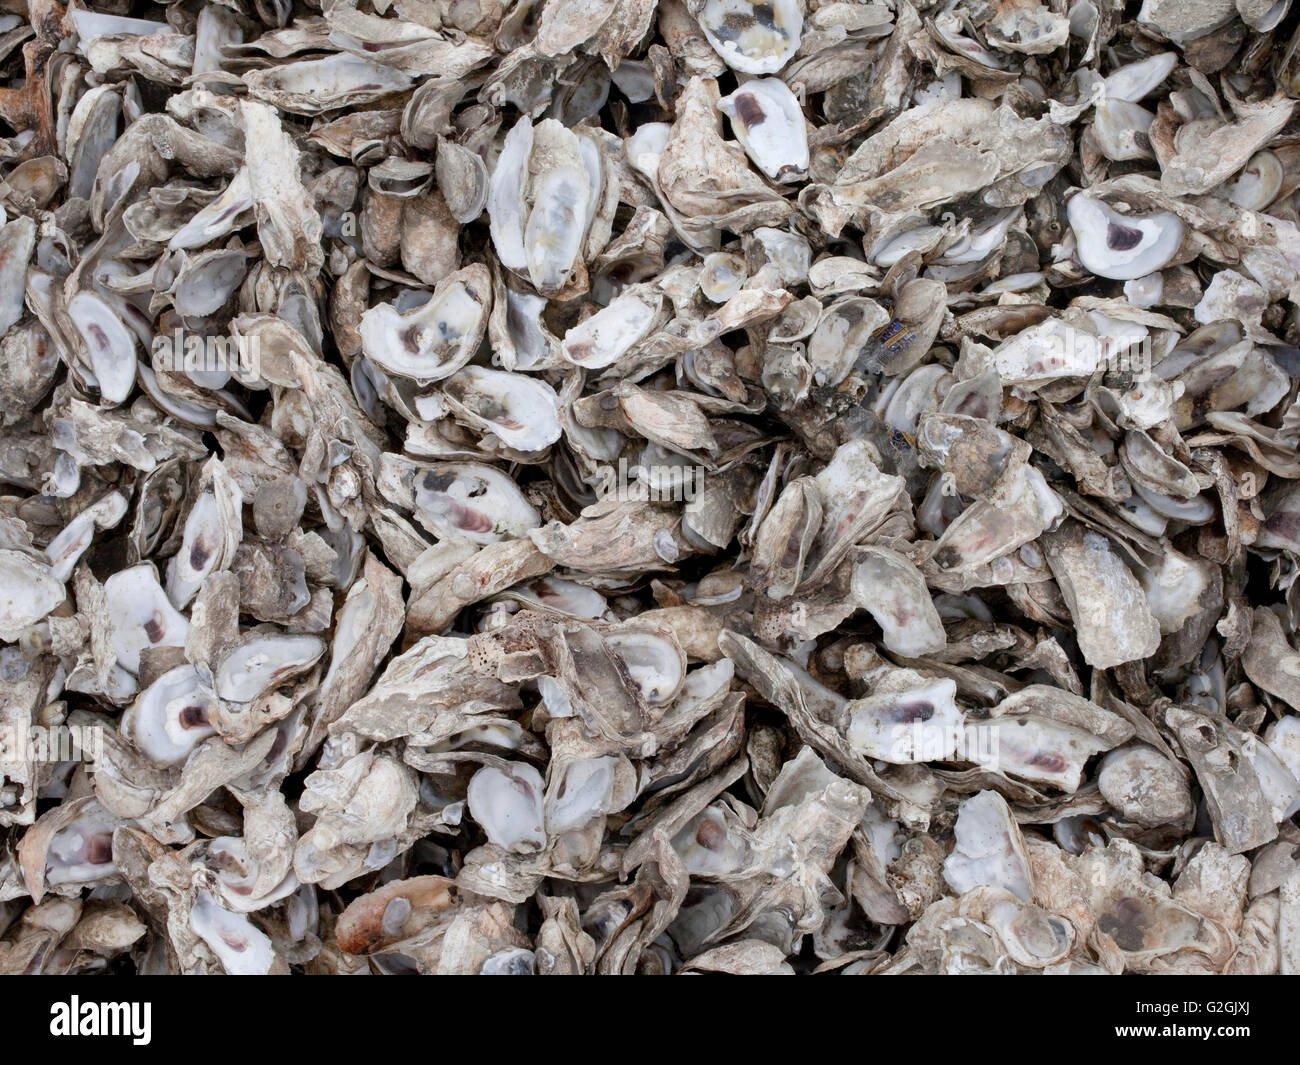 Pile of Oyster shells Stock Photo